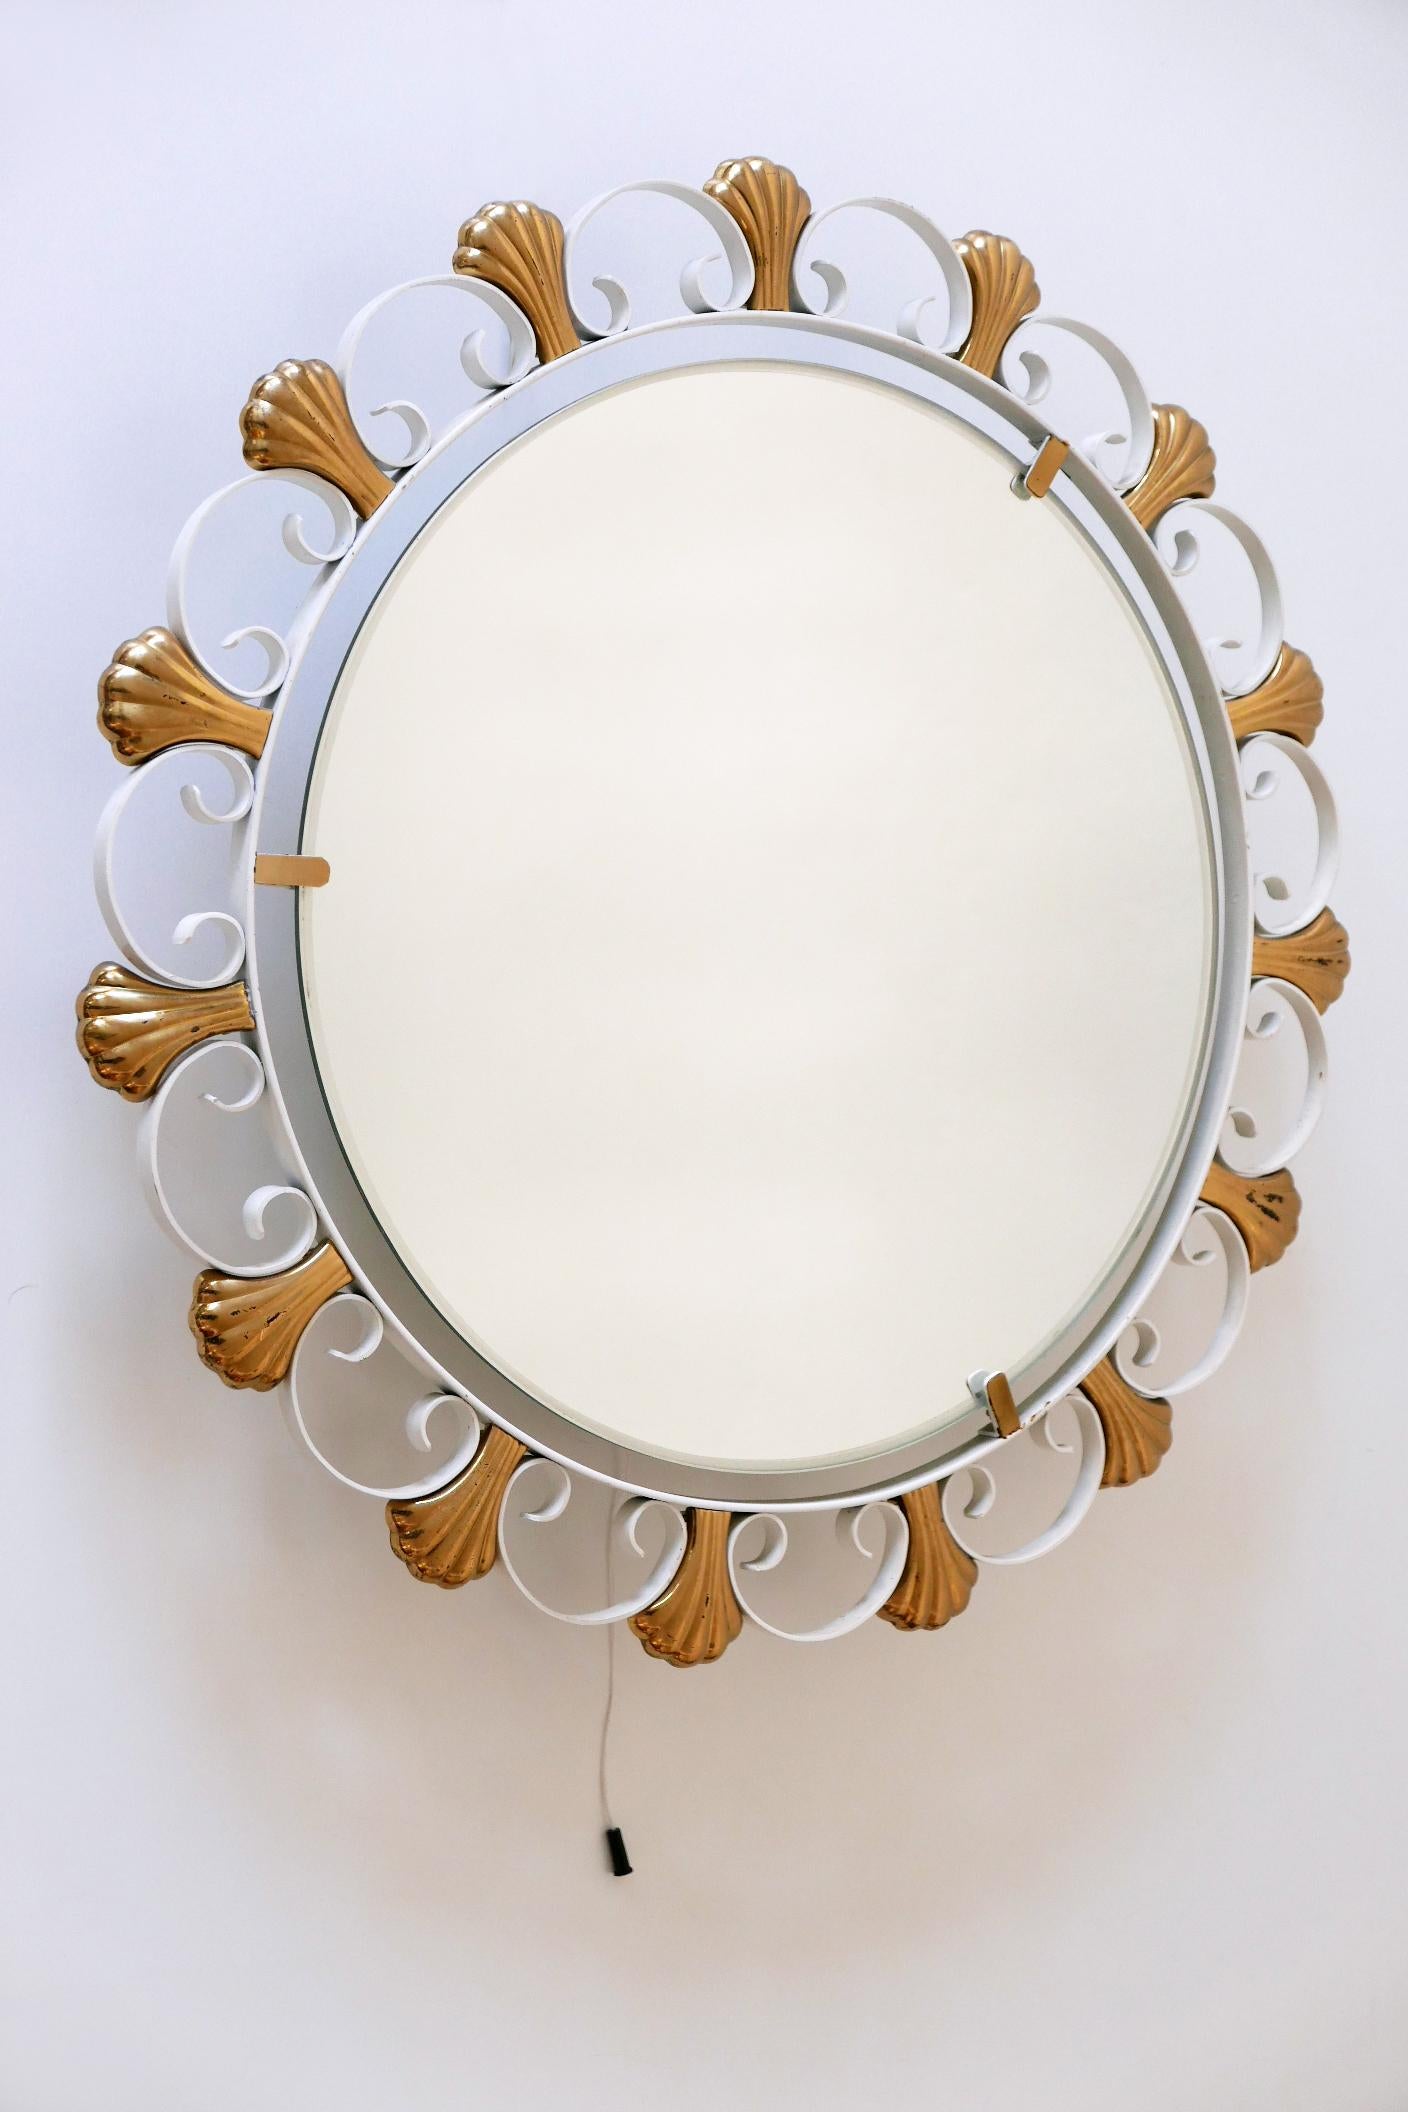 Enameled Elegant Mid-Century Modern Backlit Wall Mirror by Hillebrand, 1960s, Germany For Sale